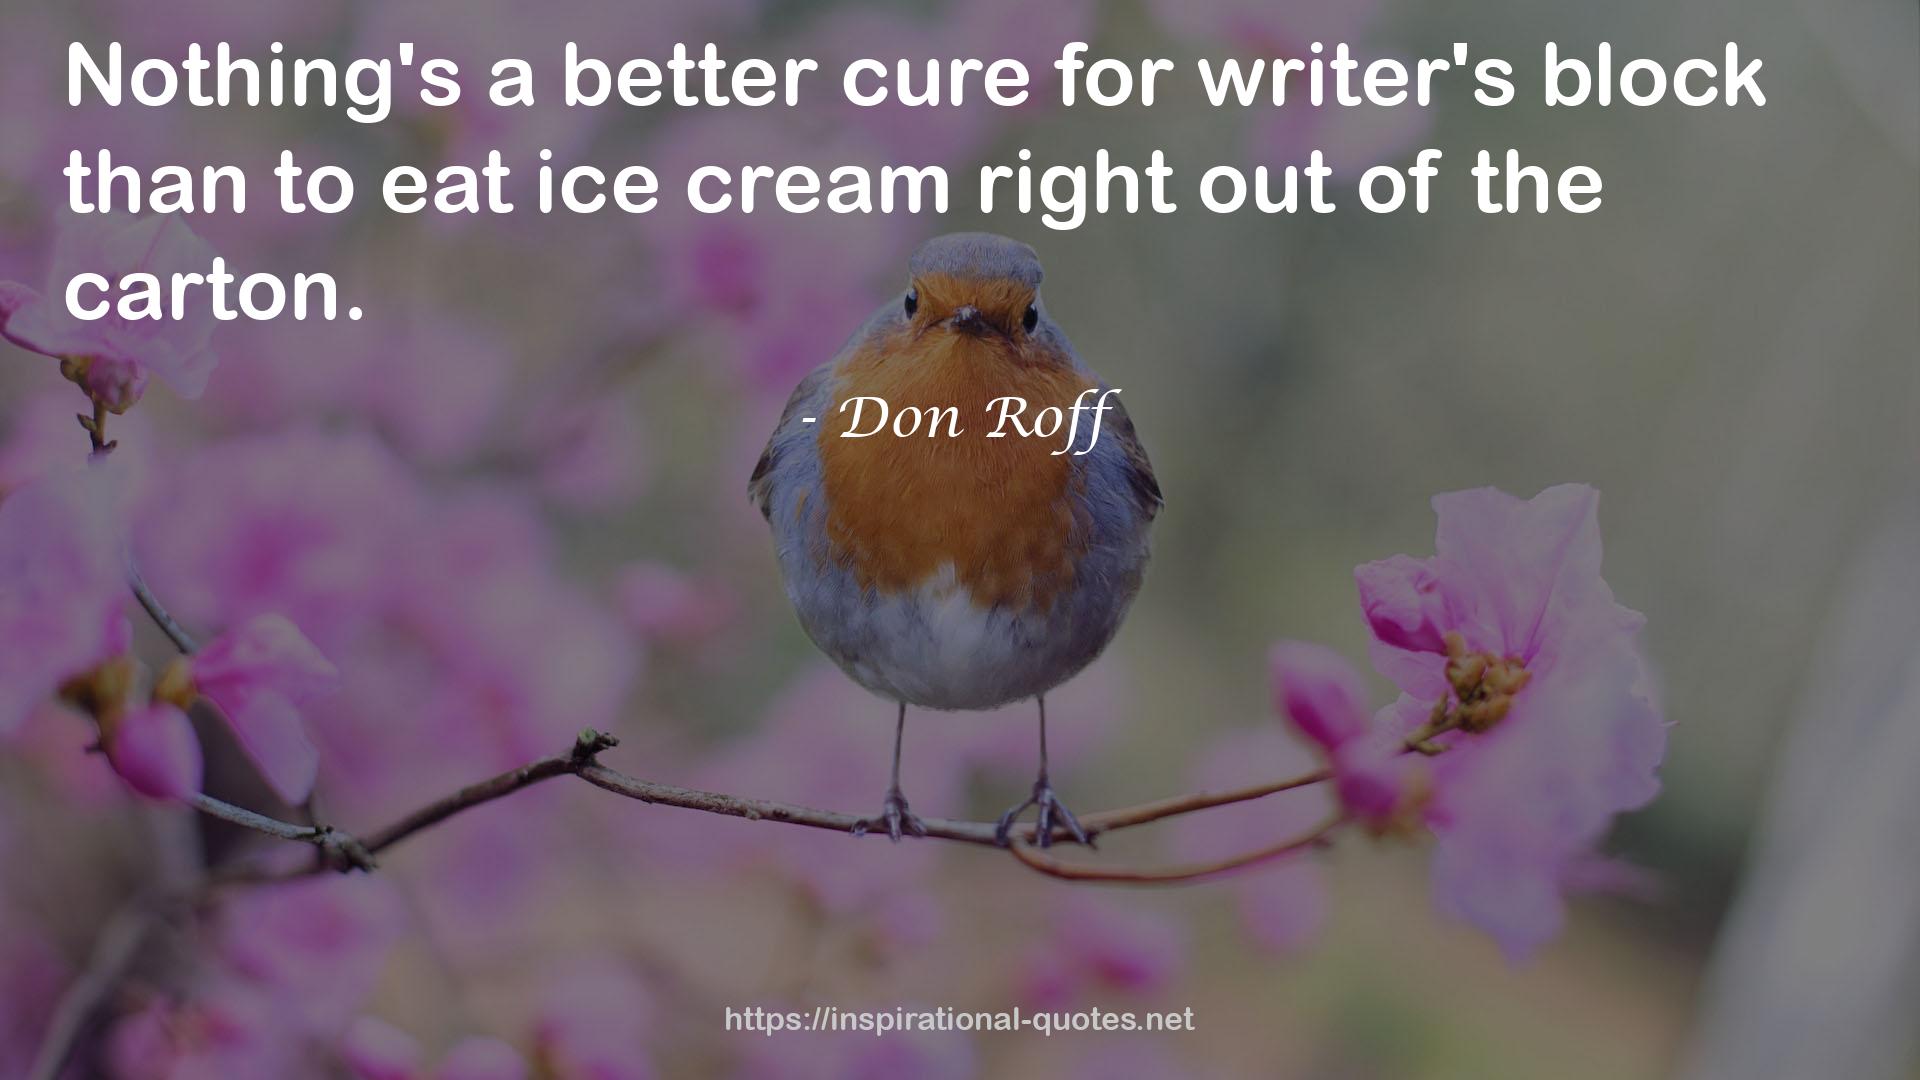 Don Roff QUOTES